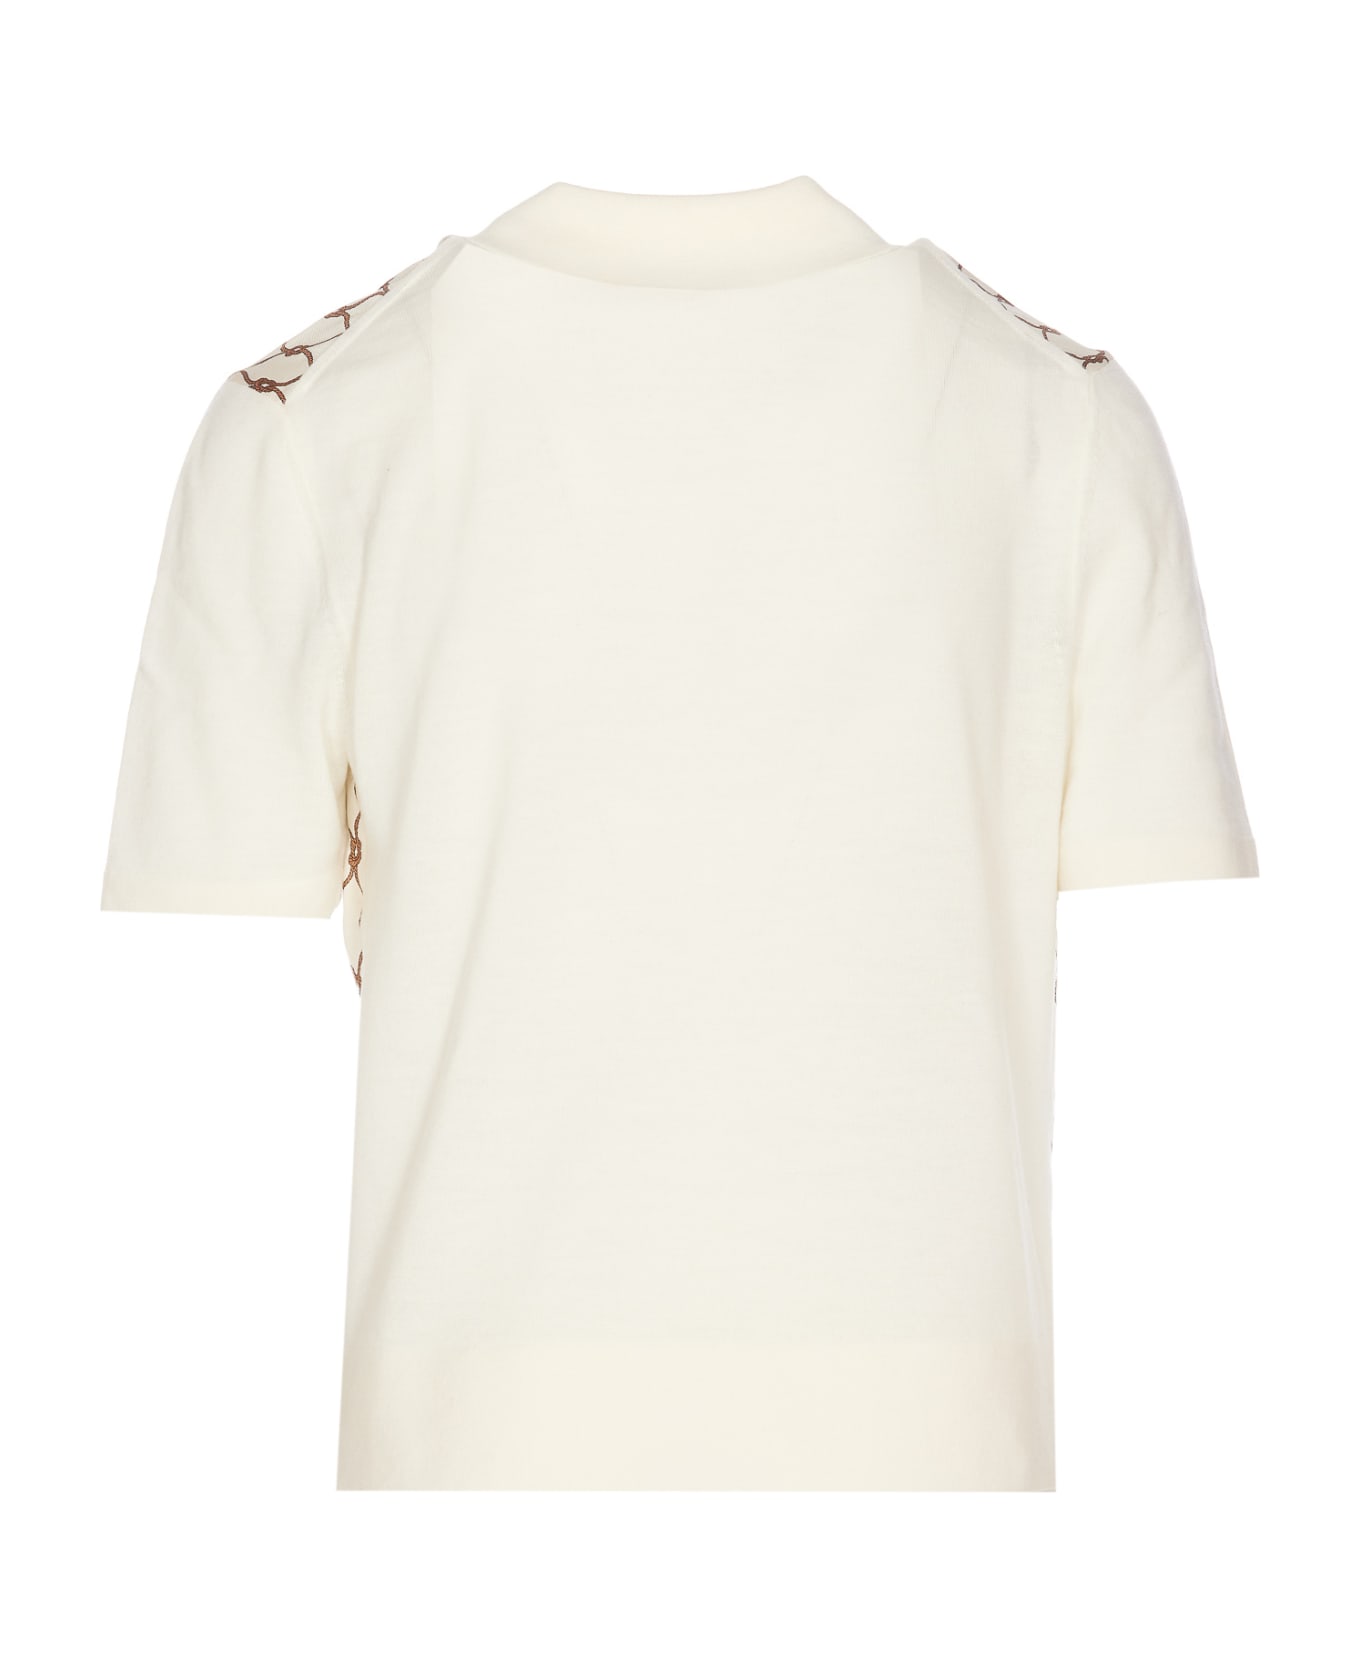 Tory Burch Polo - New Ivory Brown Knot